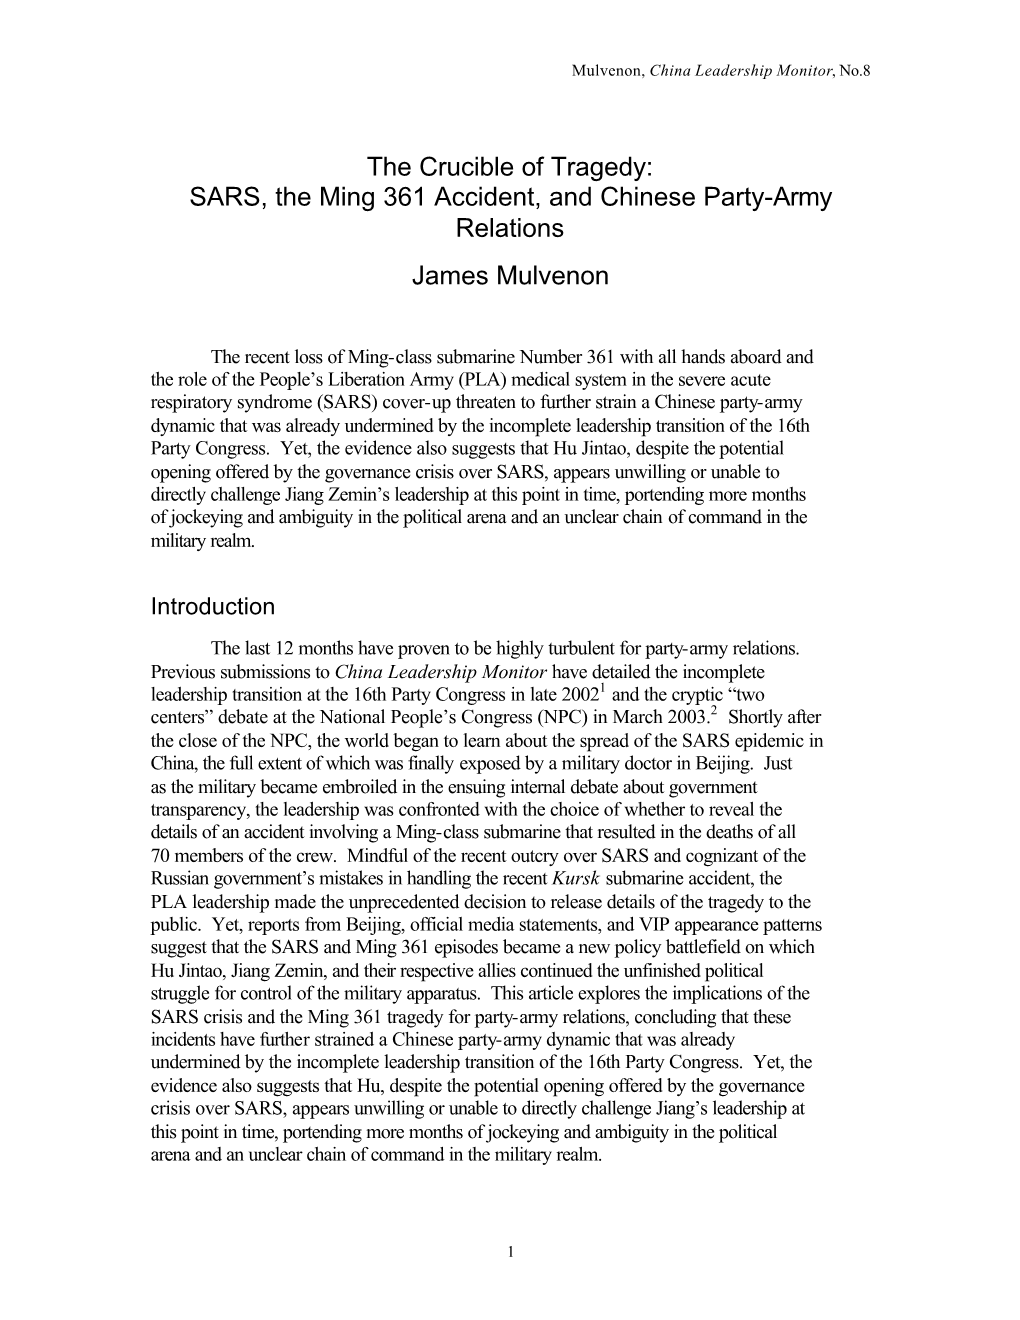 SARS, the Ming 361 Accident, and Chinese Party-Army Relations